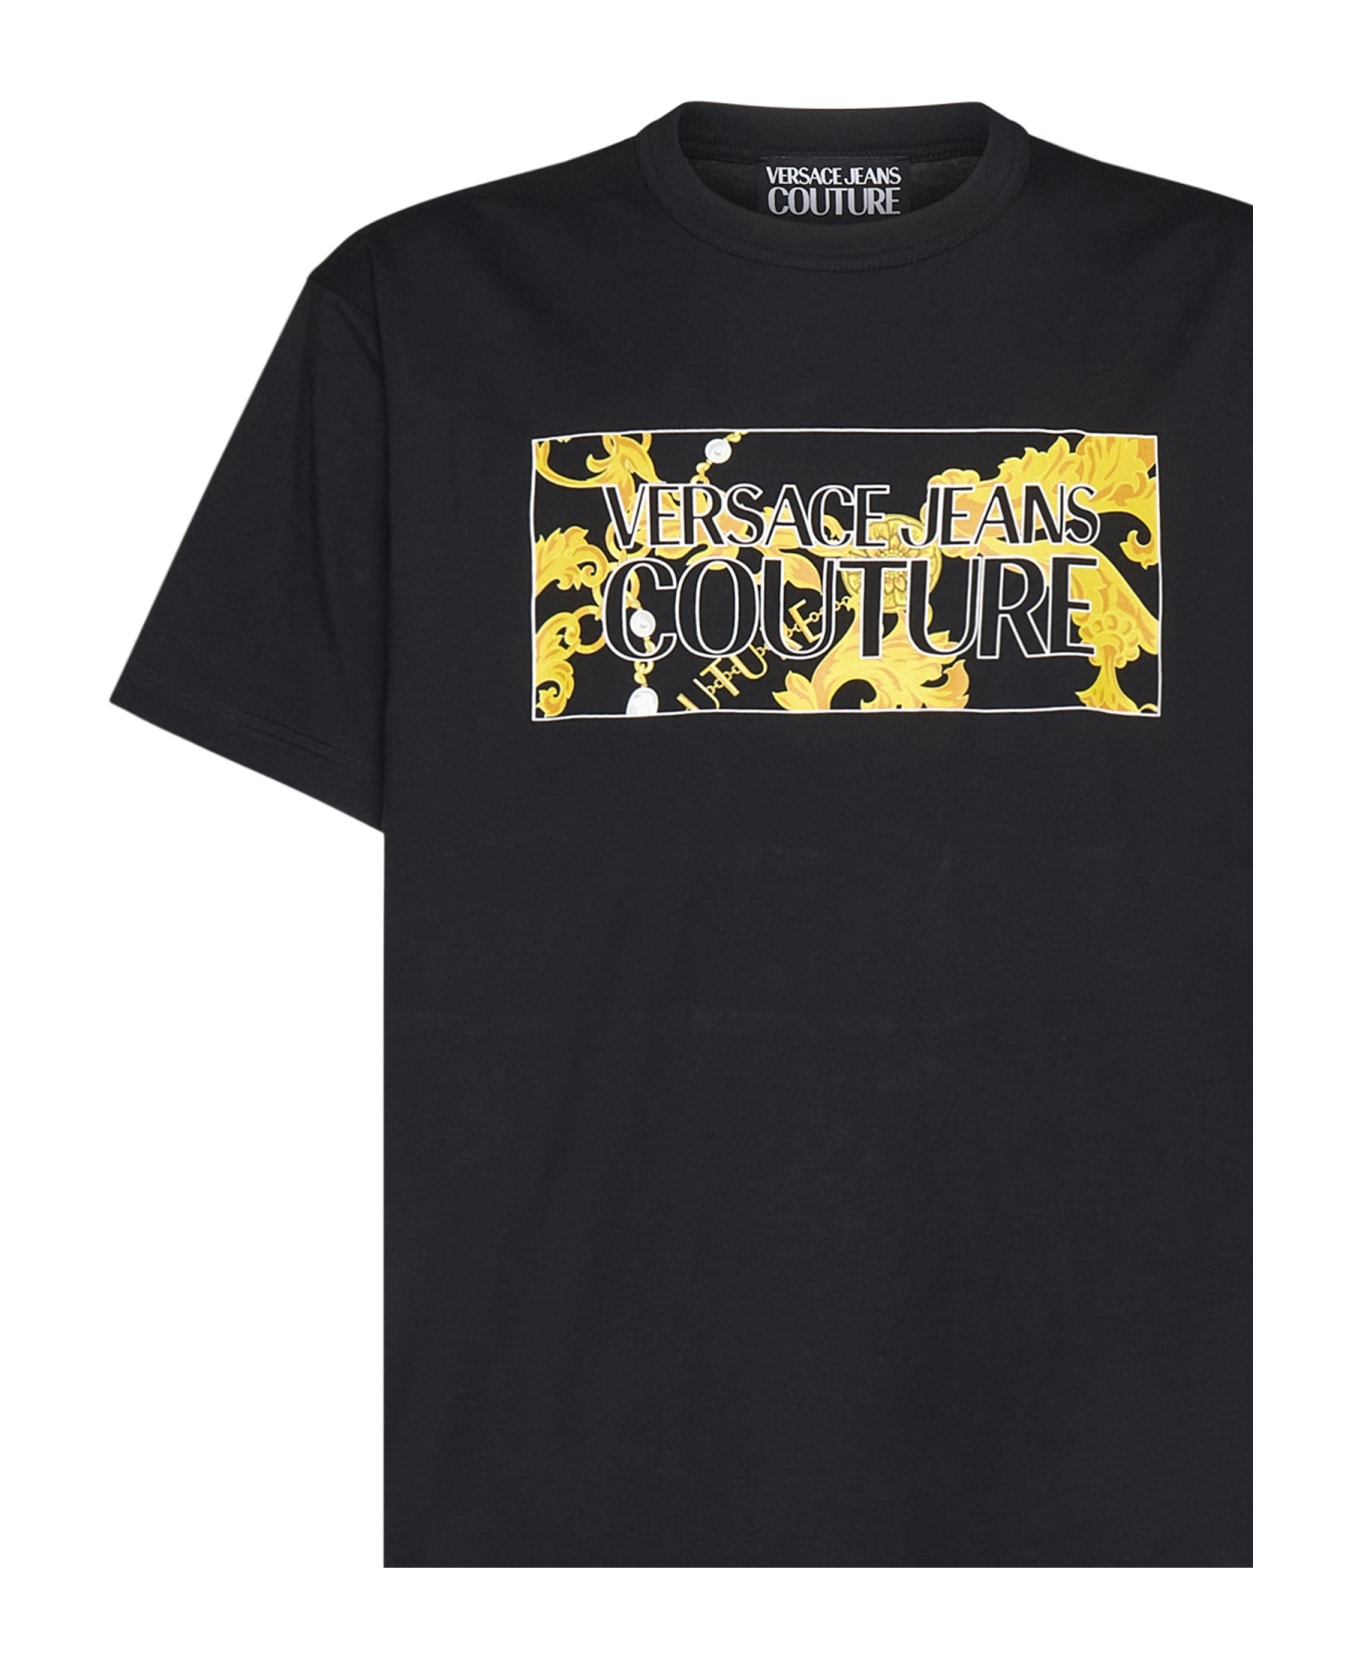 Versace Jeans Couture Versace Chain Couture T-shirt - Black gold